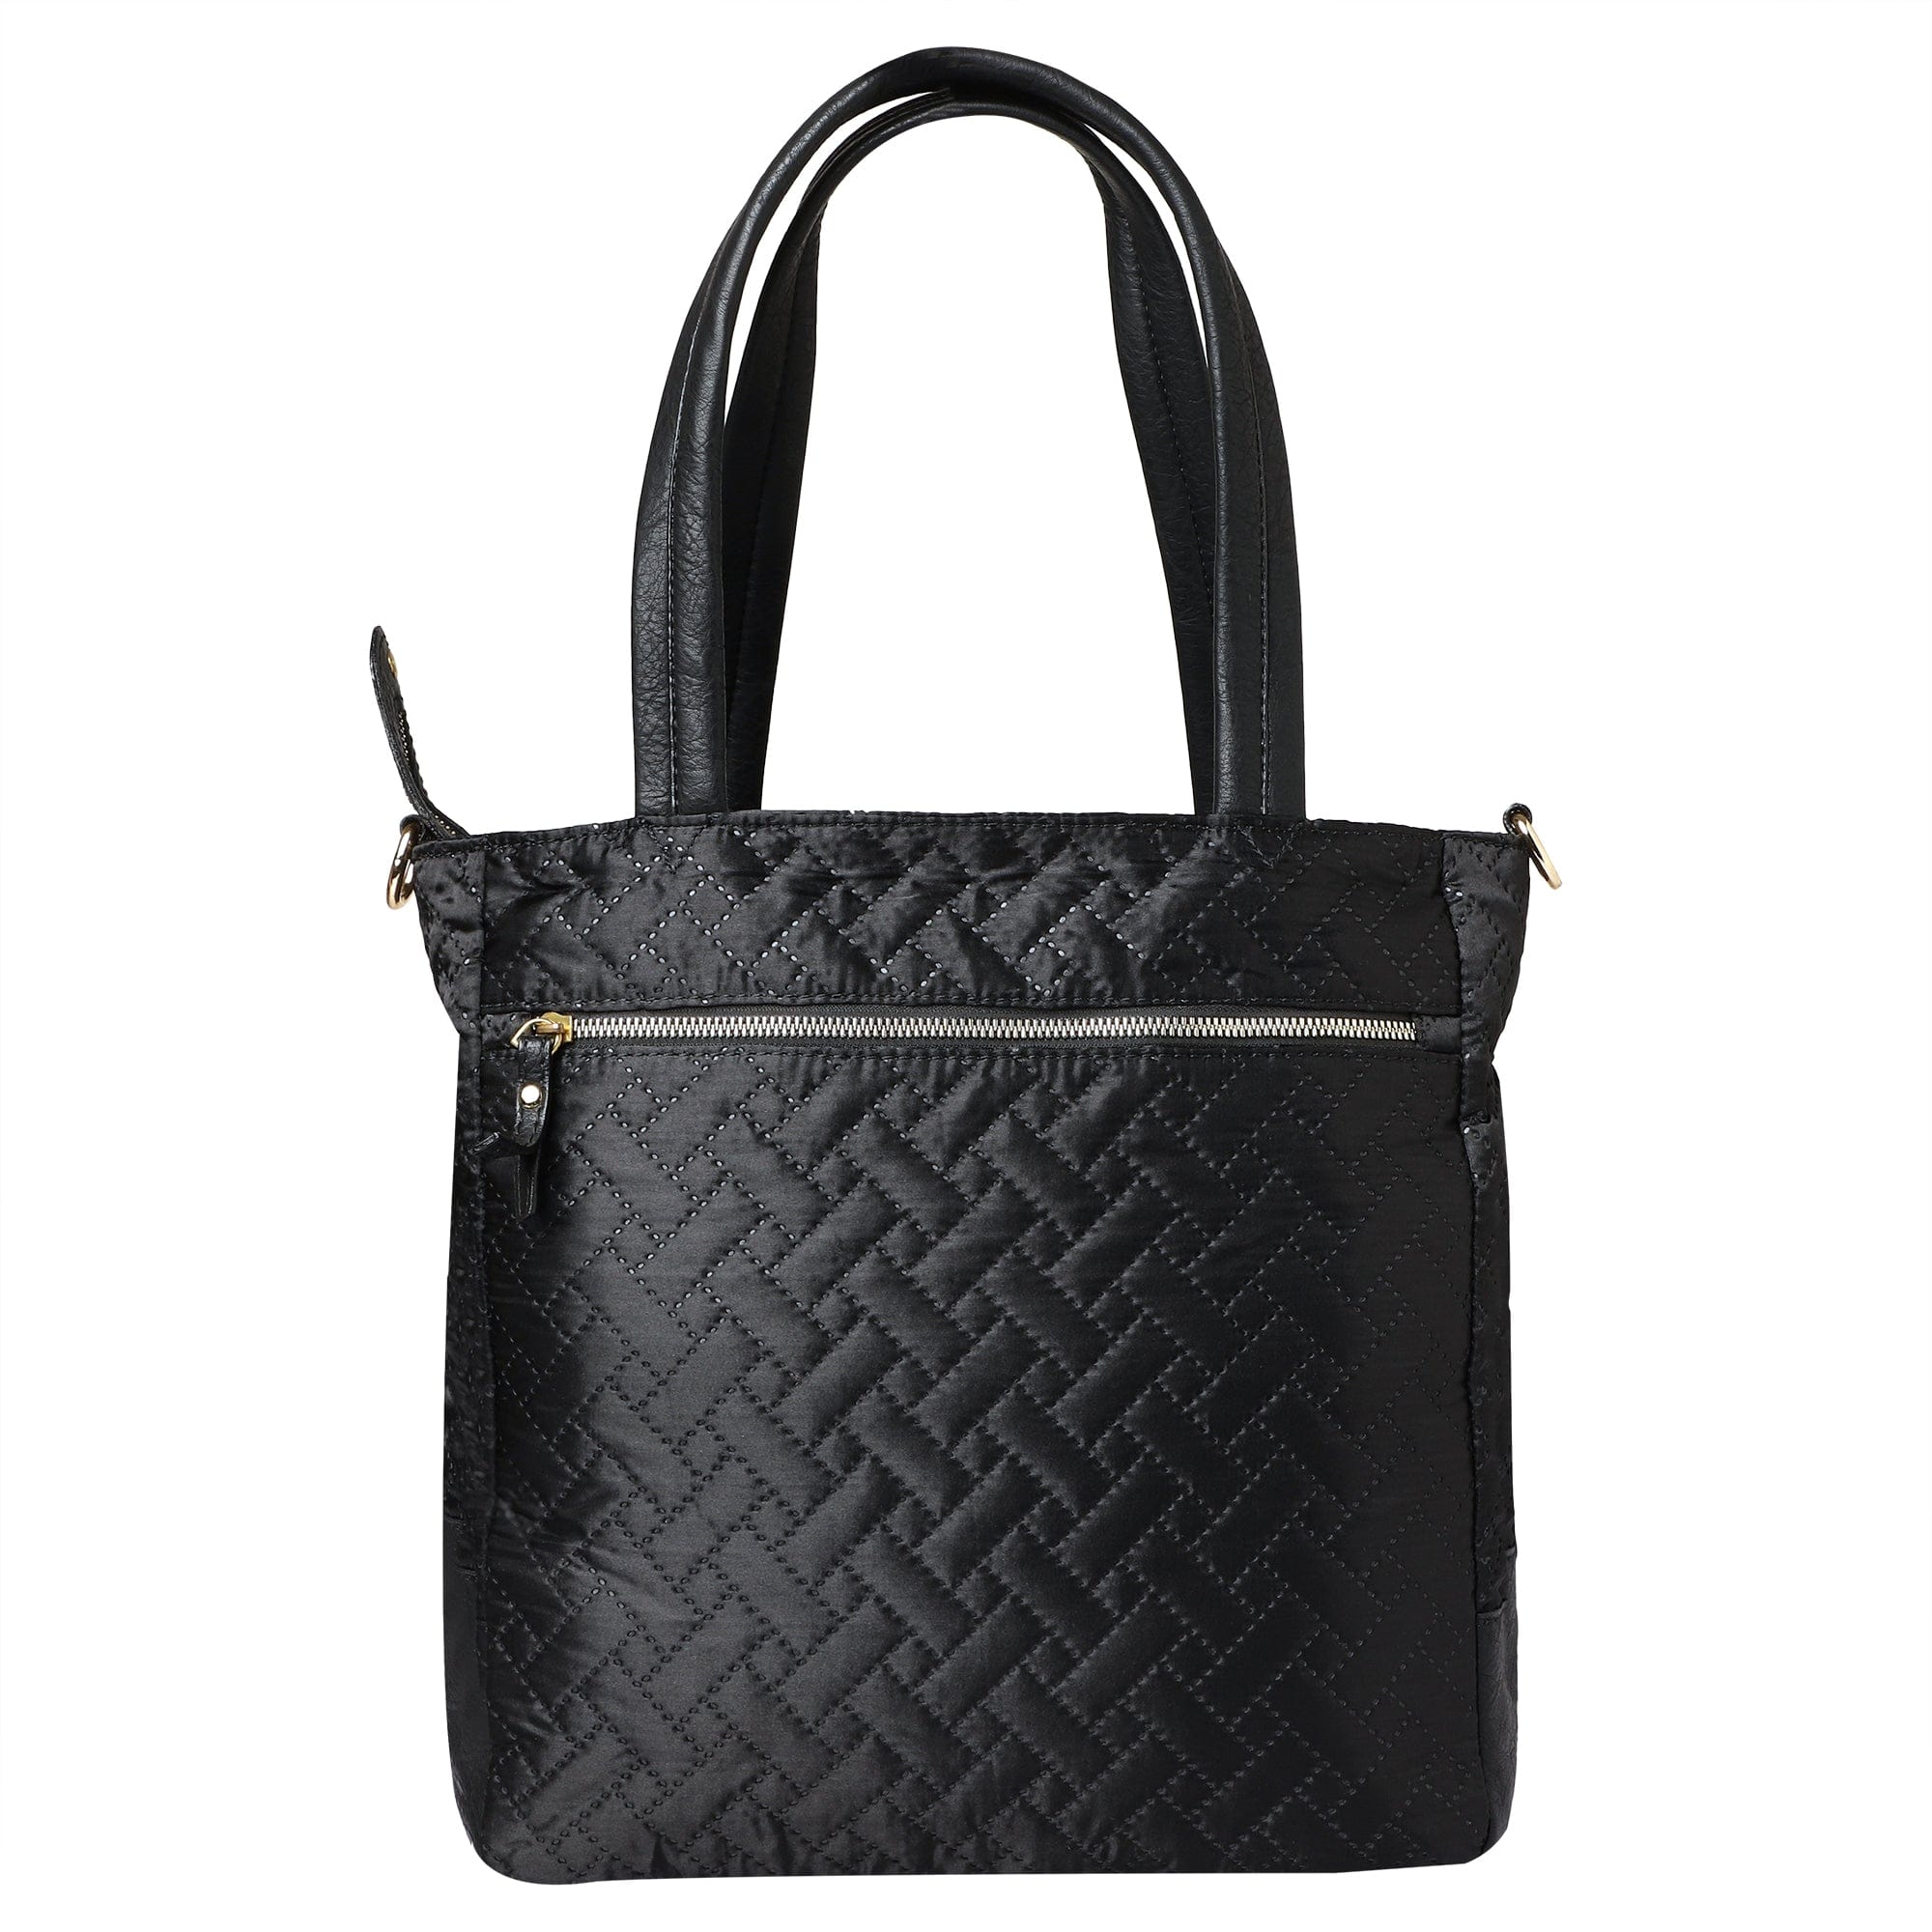 New Mona B Large Recycled Quilted Polyester Handbag for Women | Tote Bag for Grocery, Shopping, Travel | Stylish Vintage Shoulder Bags for Women: Black - Handbag by Mona-B - Backpack, New Arrivals, Sale, Shop2999, Shop3999